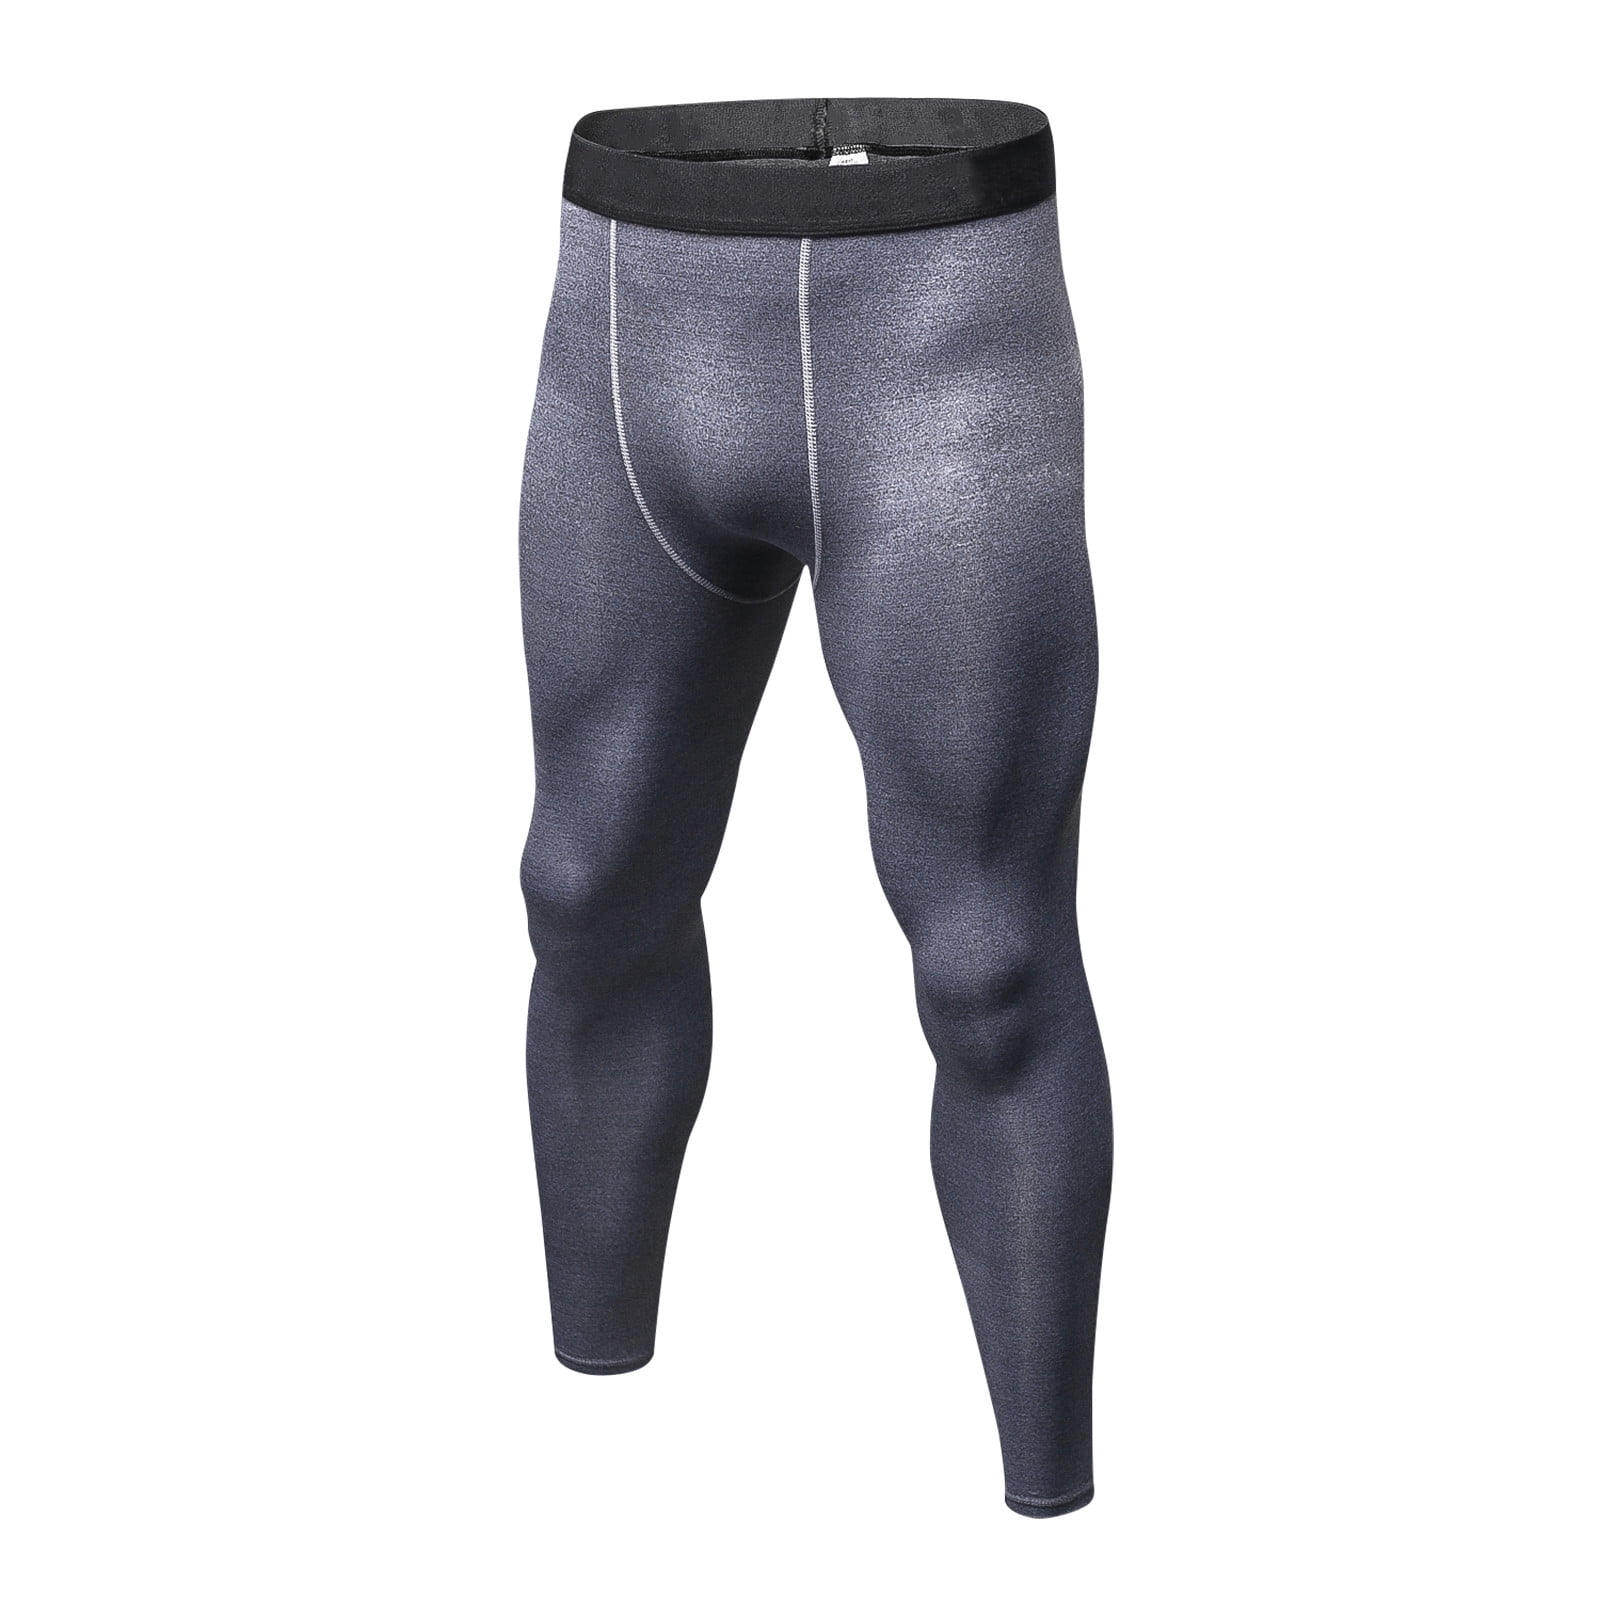 Men's Compression Pants Sports Baselayer Tights Leggings Running Yoga  Athletic Workout Pants 